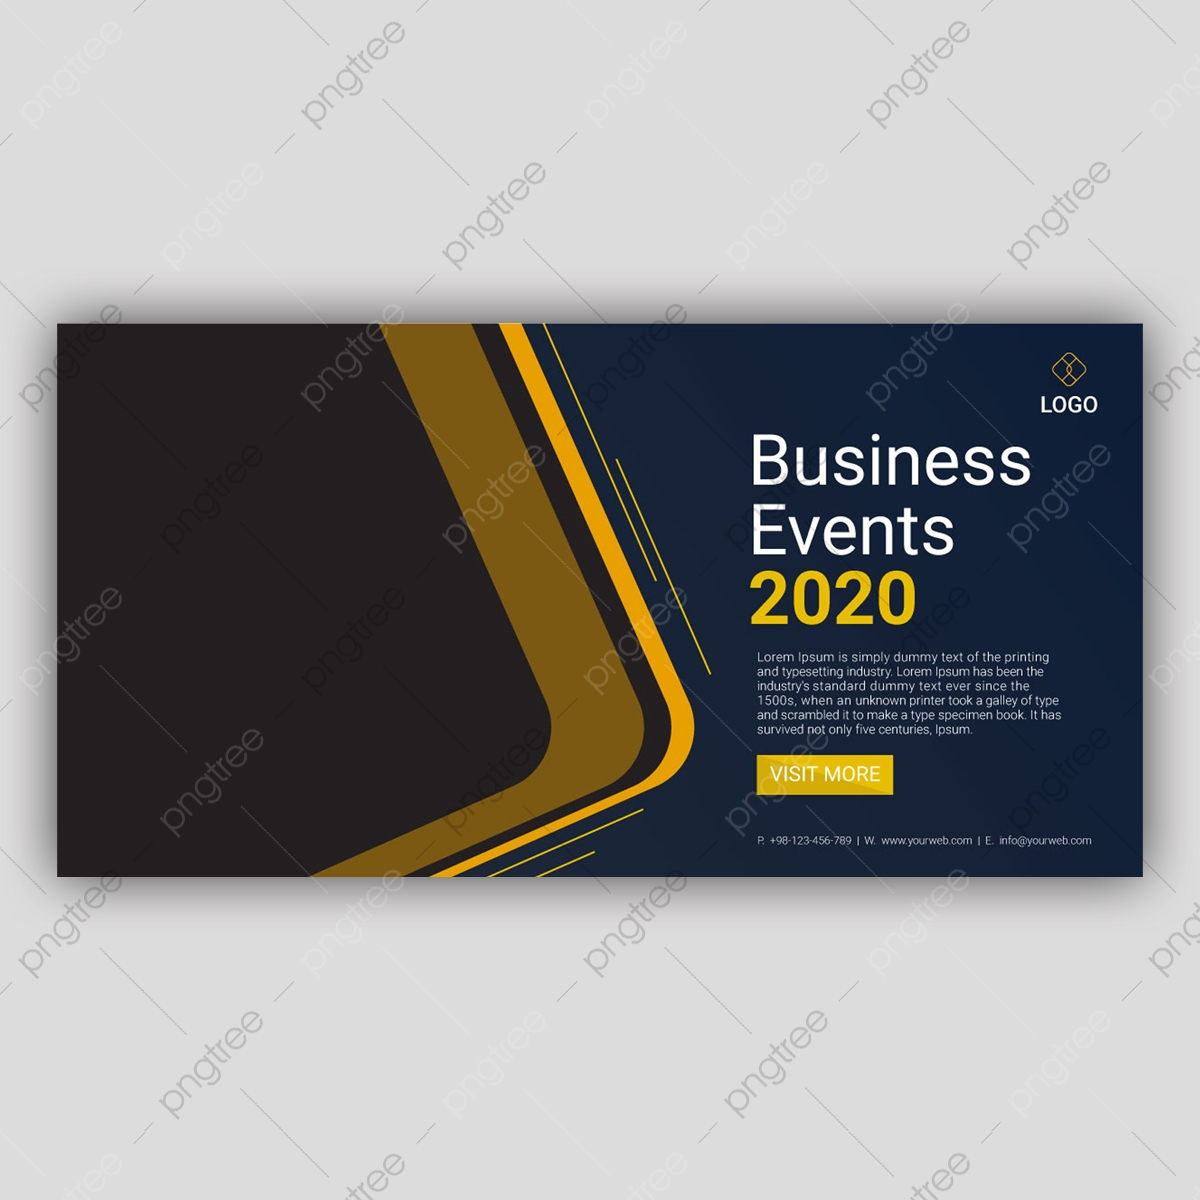 Business Event Banner Design Template Download on Pngtree